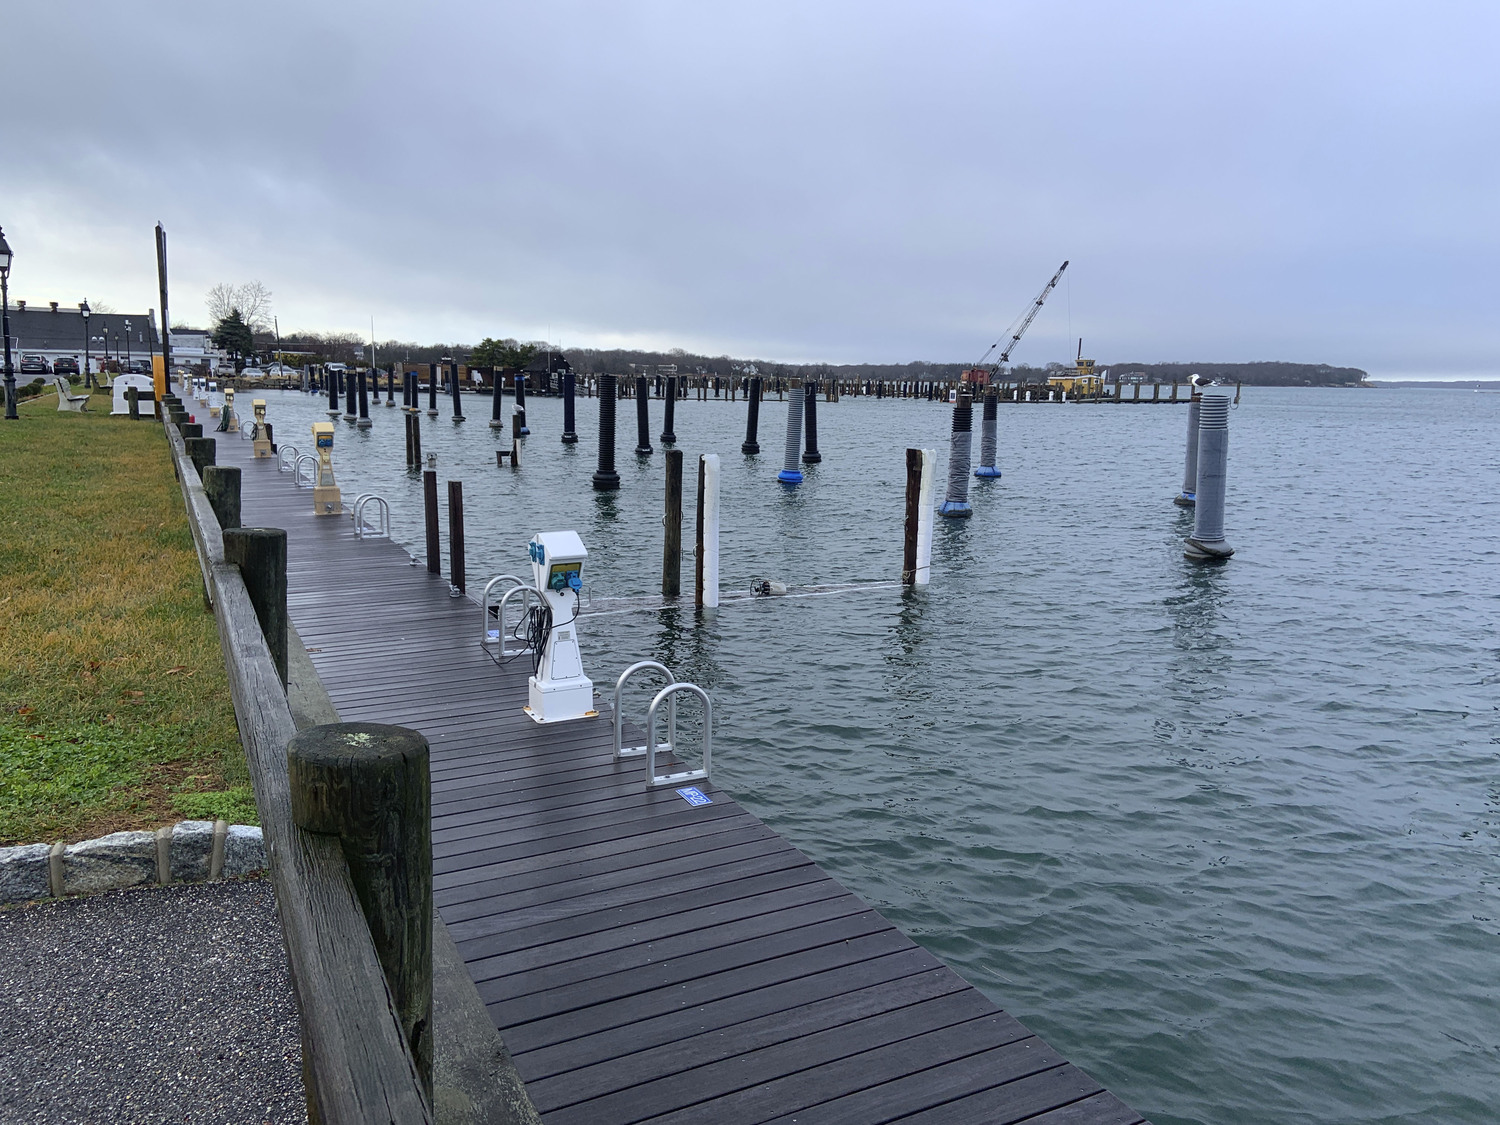 Waterfront Marina in Sag Harbor at high tide on Monday after a Sunday night storm bashed the area.  STEPHEN J. KOTZ